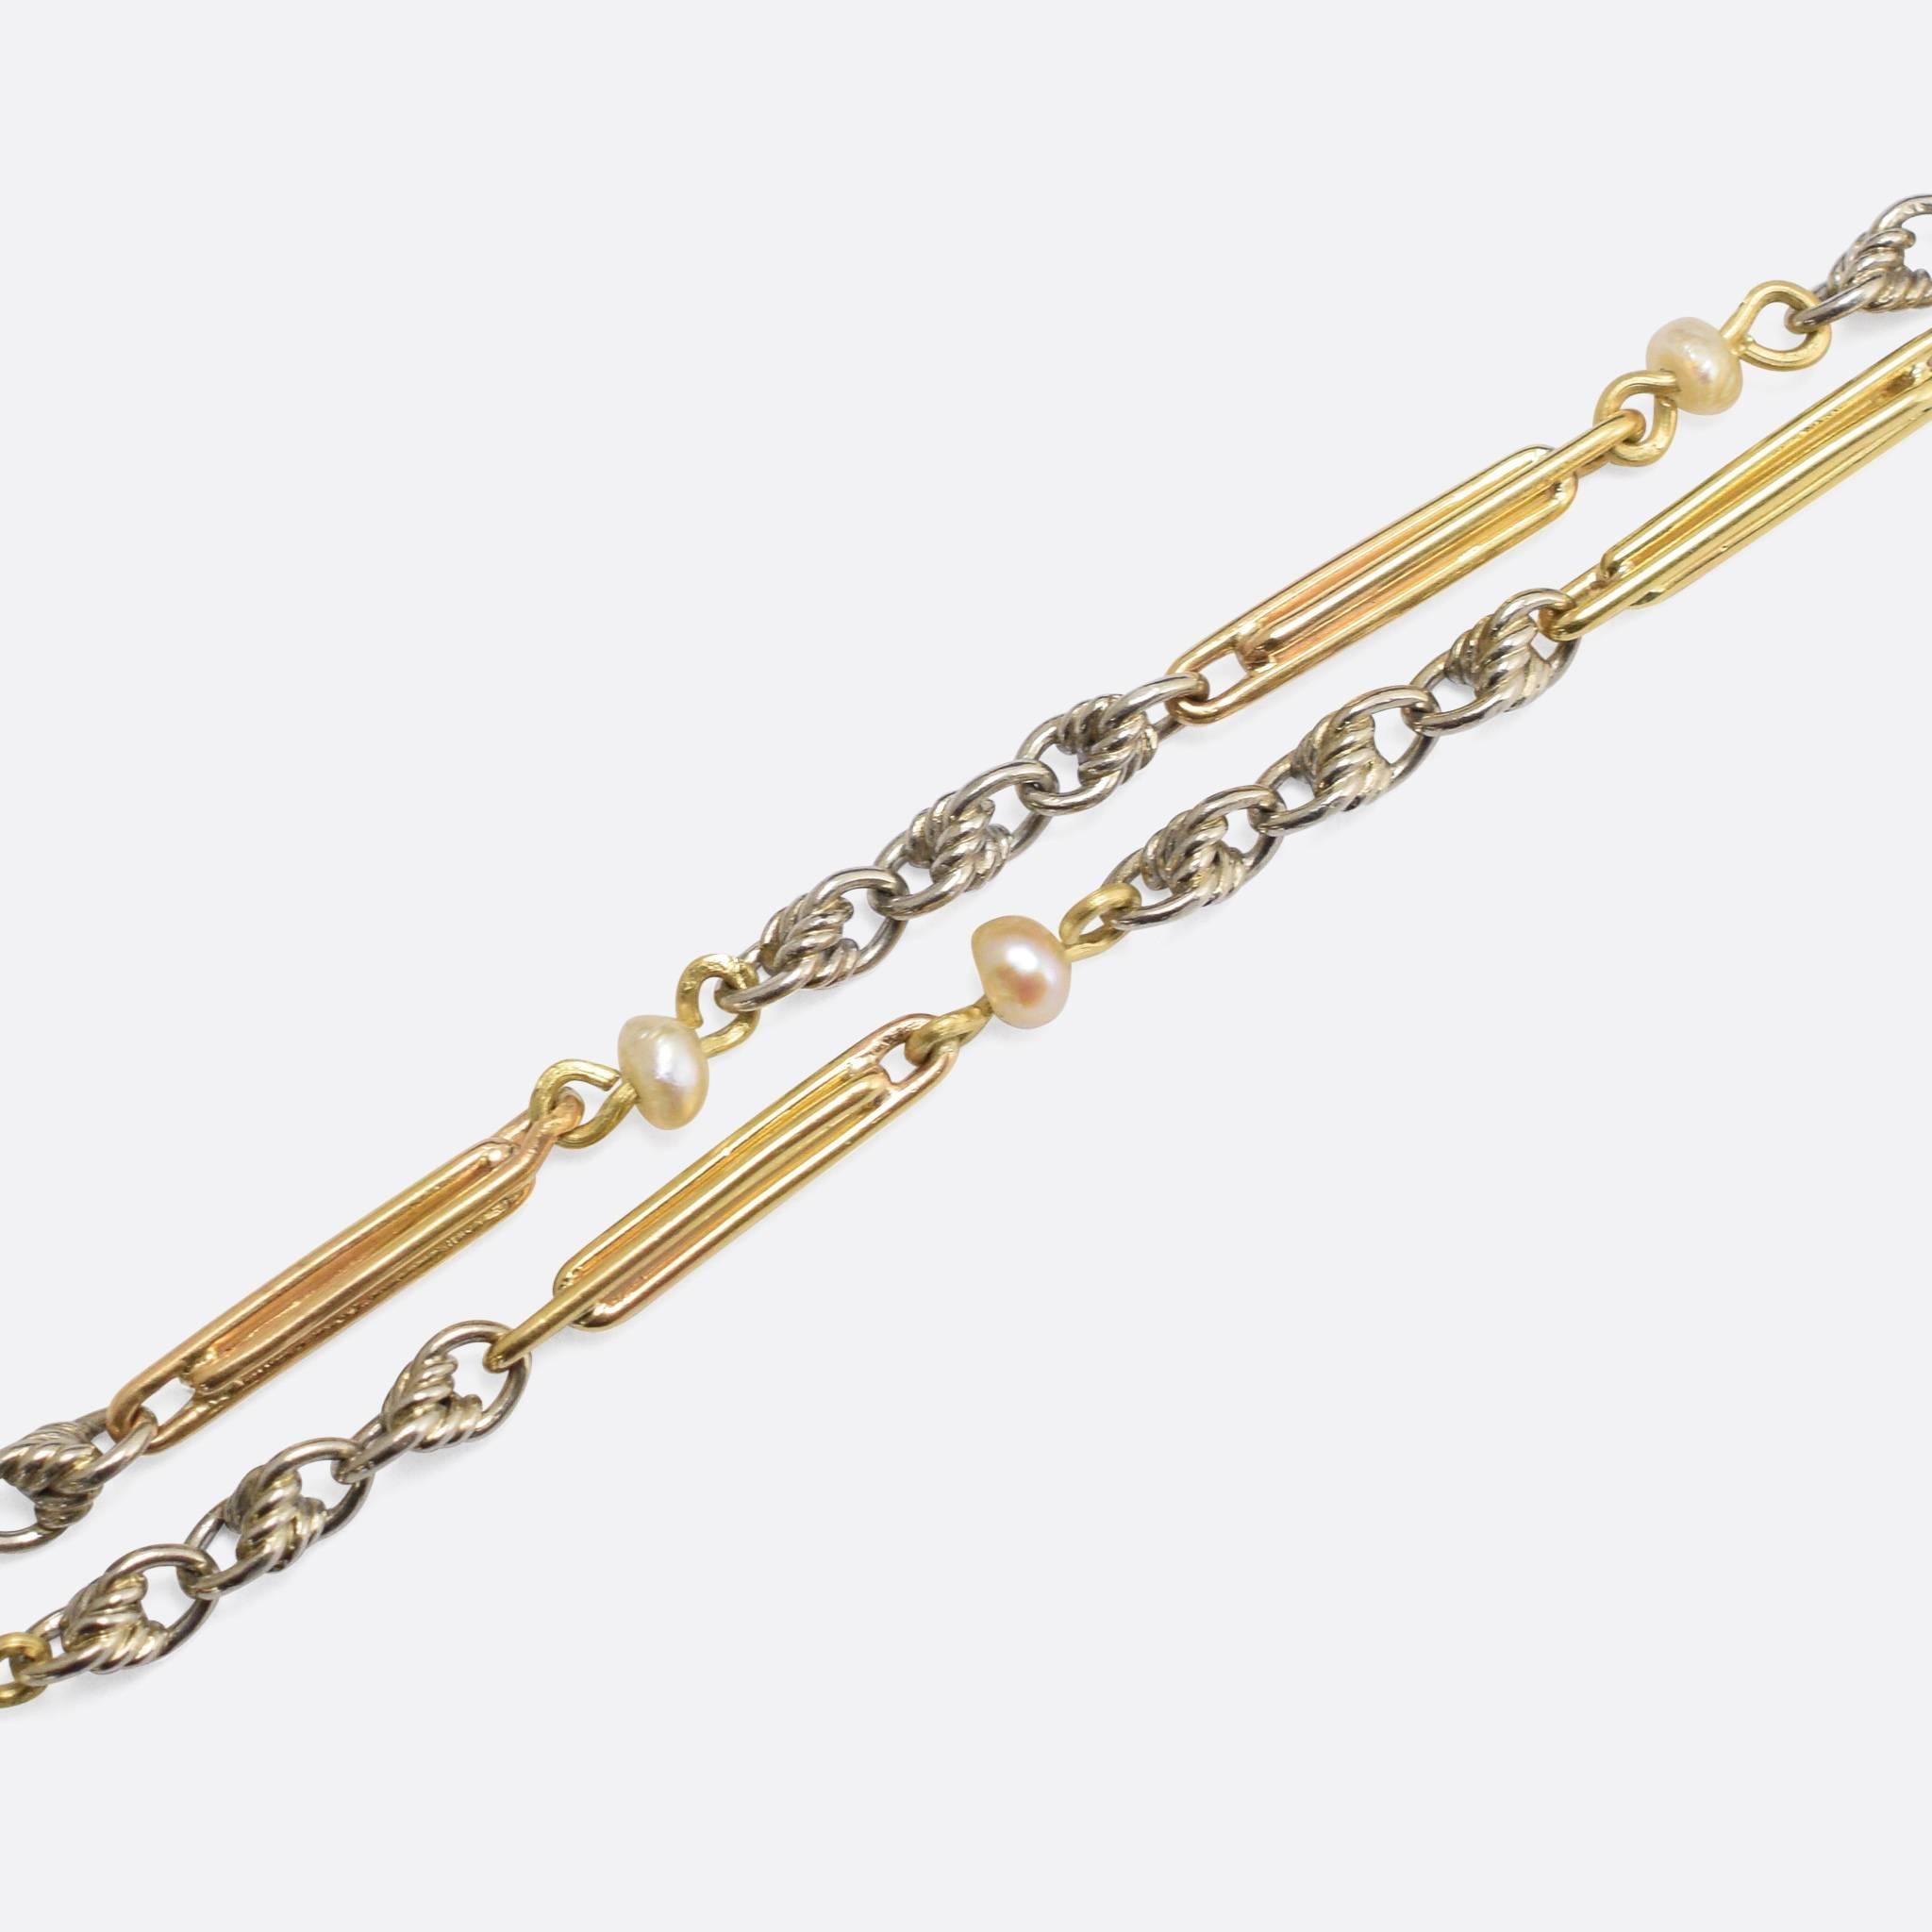 A wonderful antique chain, set with 12 baroque pearls and modelled in alternating 18k gold and platinum sections. The platinum is worked into pretty twisted links, while the 18k gold links are formed into long bars.

STONES
Natural Baroque